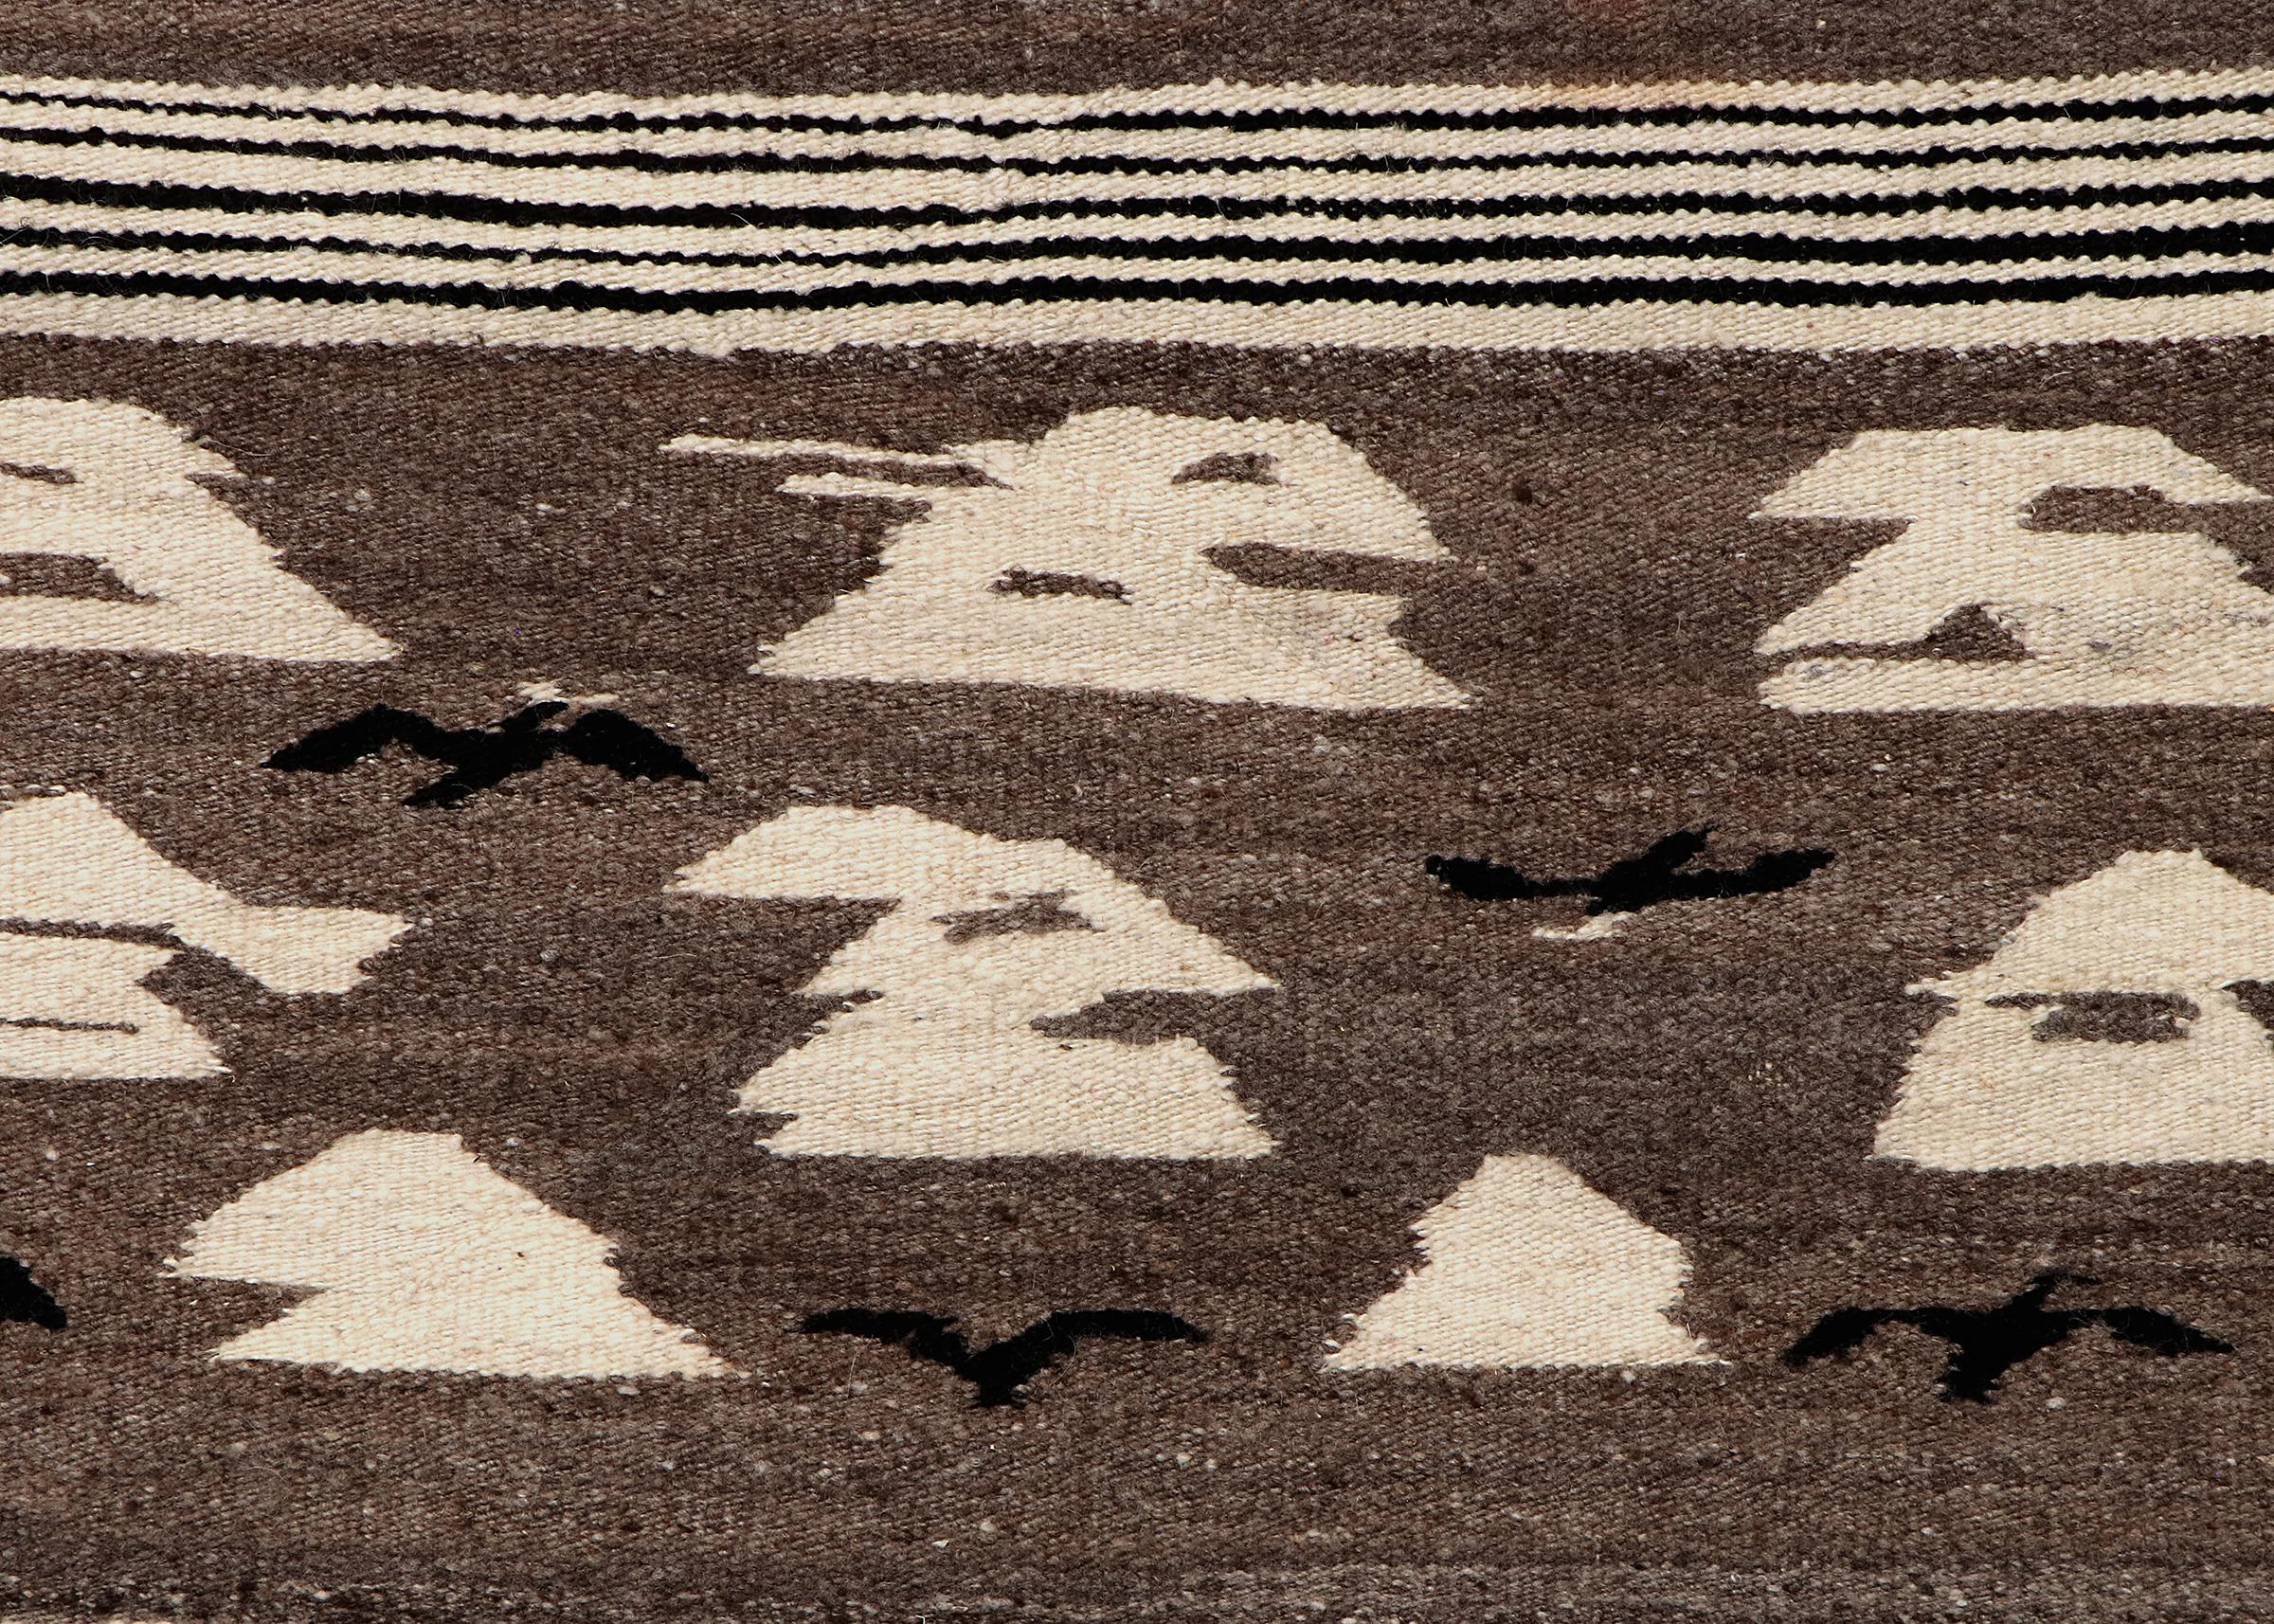 Hand-Woven Vintage Navajo Rug, Pictorial, Zebra, Clouds, Birds, 1950s, Brown, Black, White For Sale